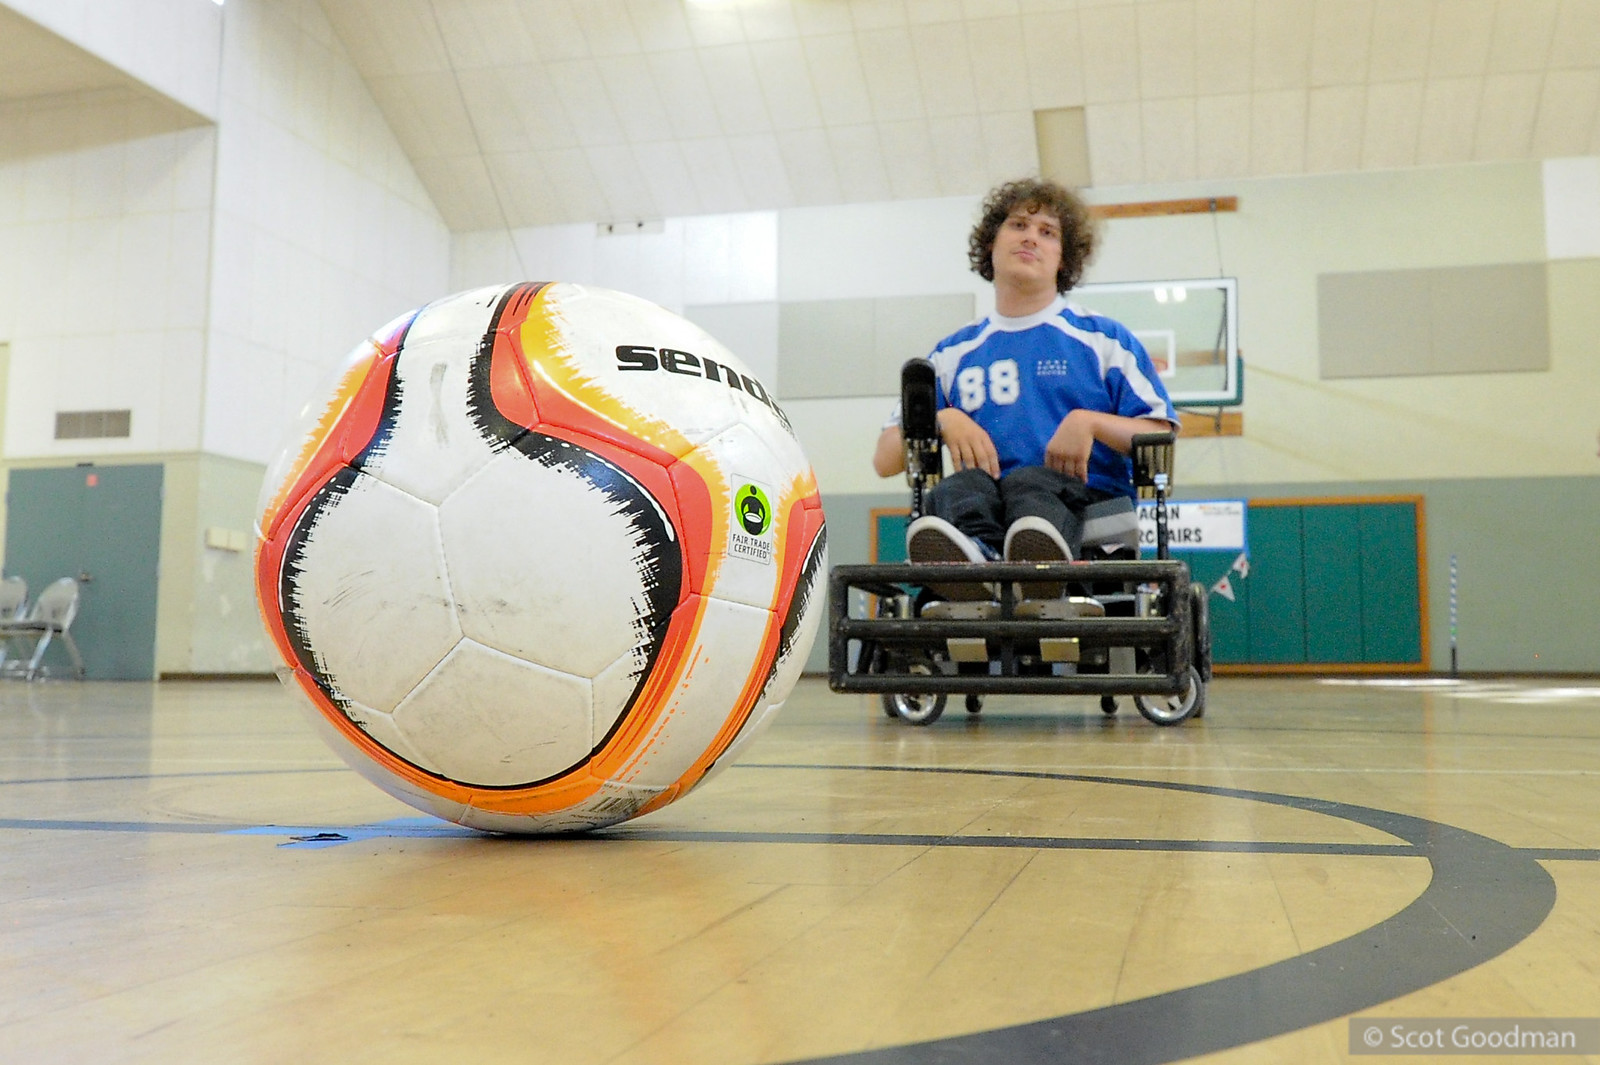 Soccer ball sitting on gymnasium floor with male athlete in a wheelchair smiling at the camera